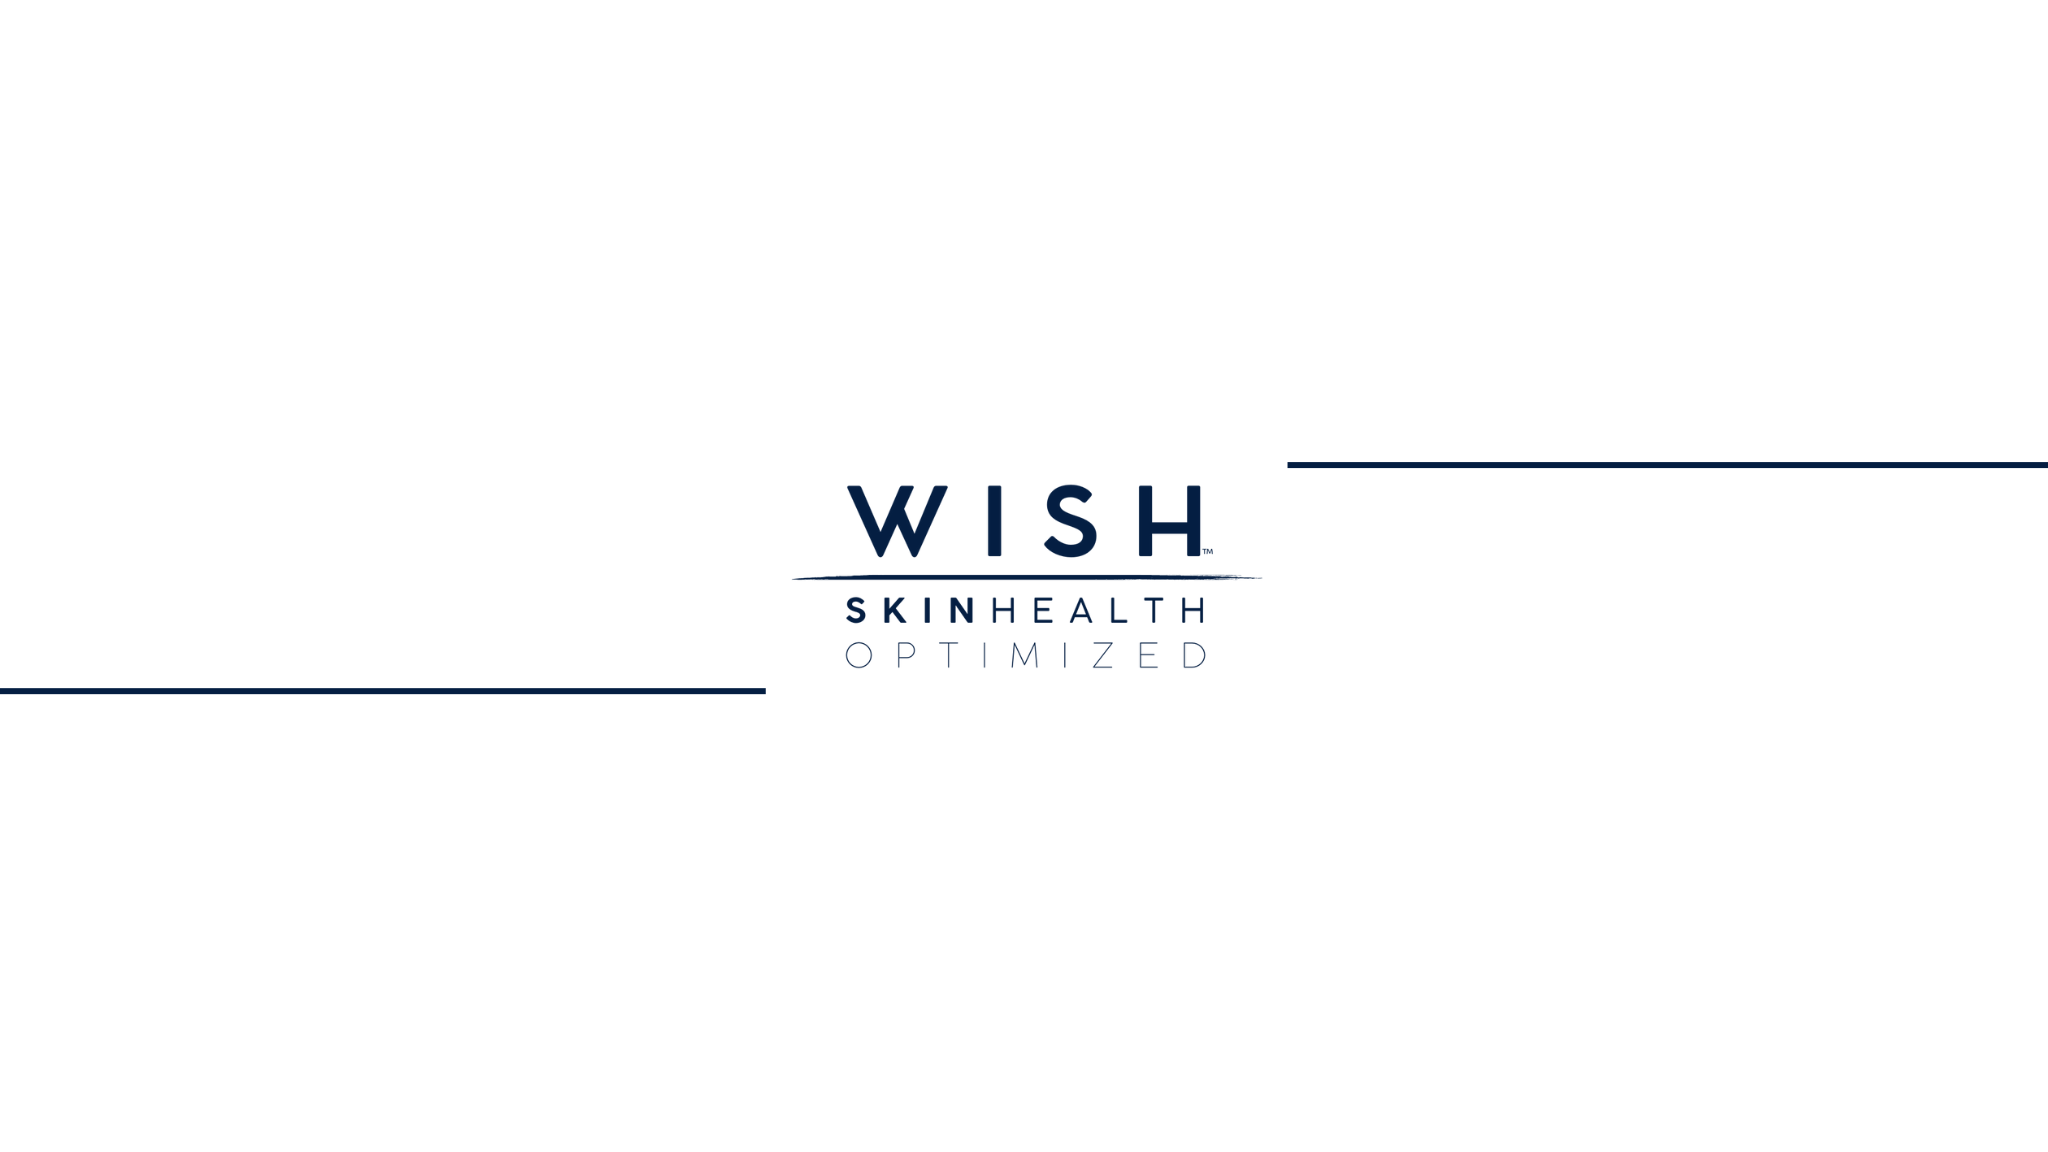 wish skin health professional grade skincare. Nourish a radiant glow with power plant extracts, peptides, and antioxidants. Inclusive affordable pay over time or subscribe and save. Free shipping